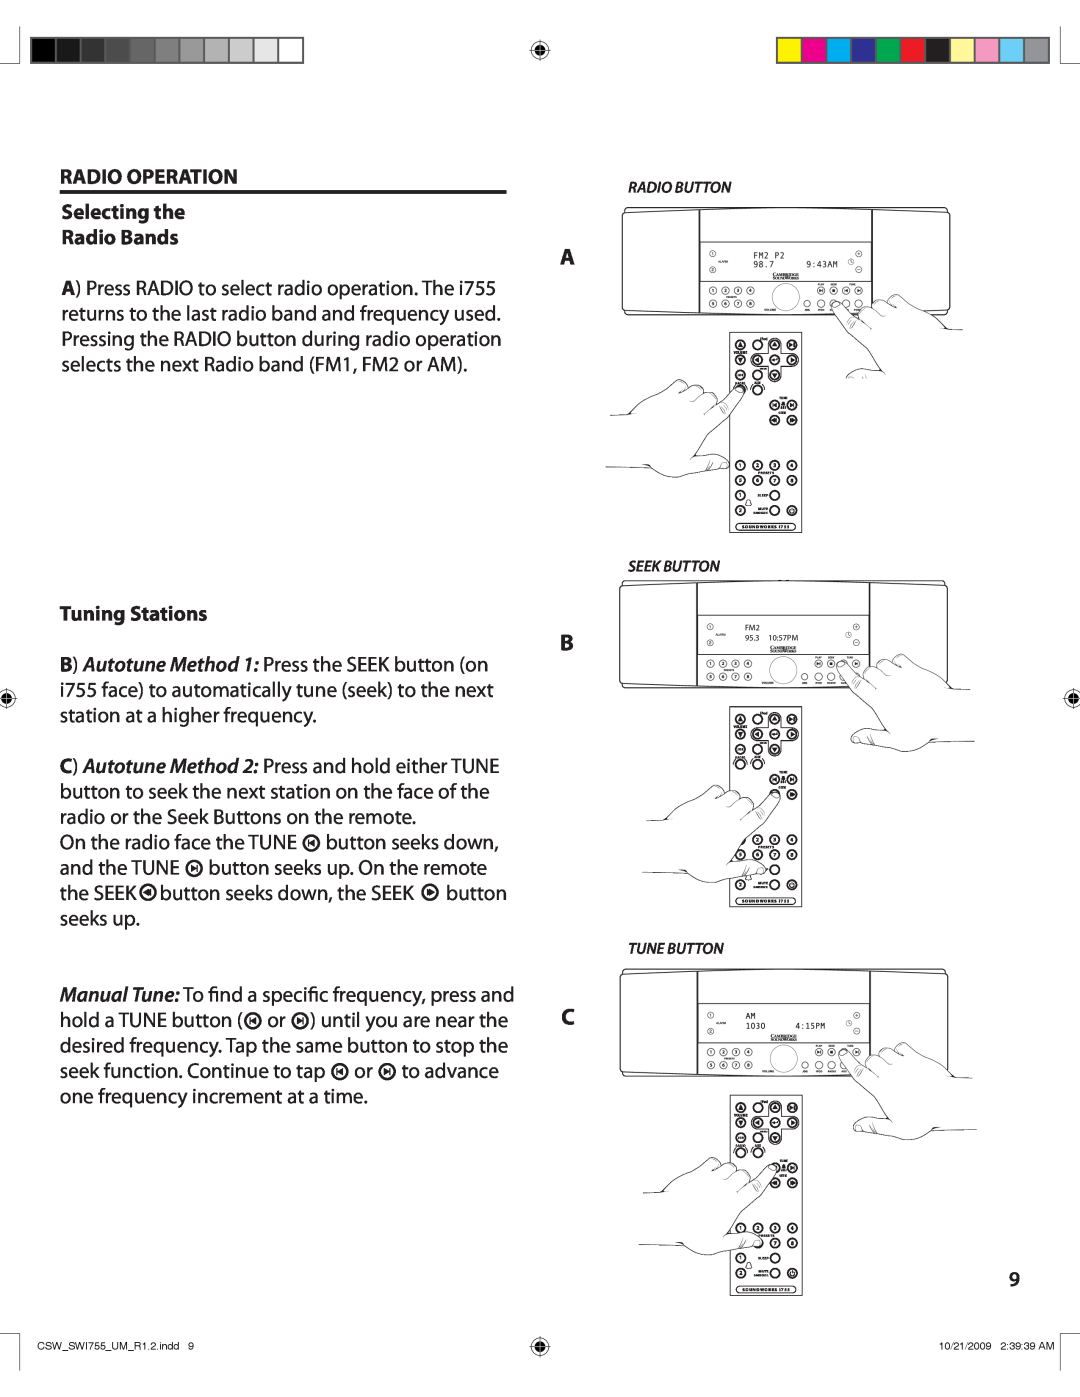 Cambridge SoundWorks I755 user manual A B C, RADIO OPERATION Selecting the Radio Bands, Tuning Stations 